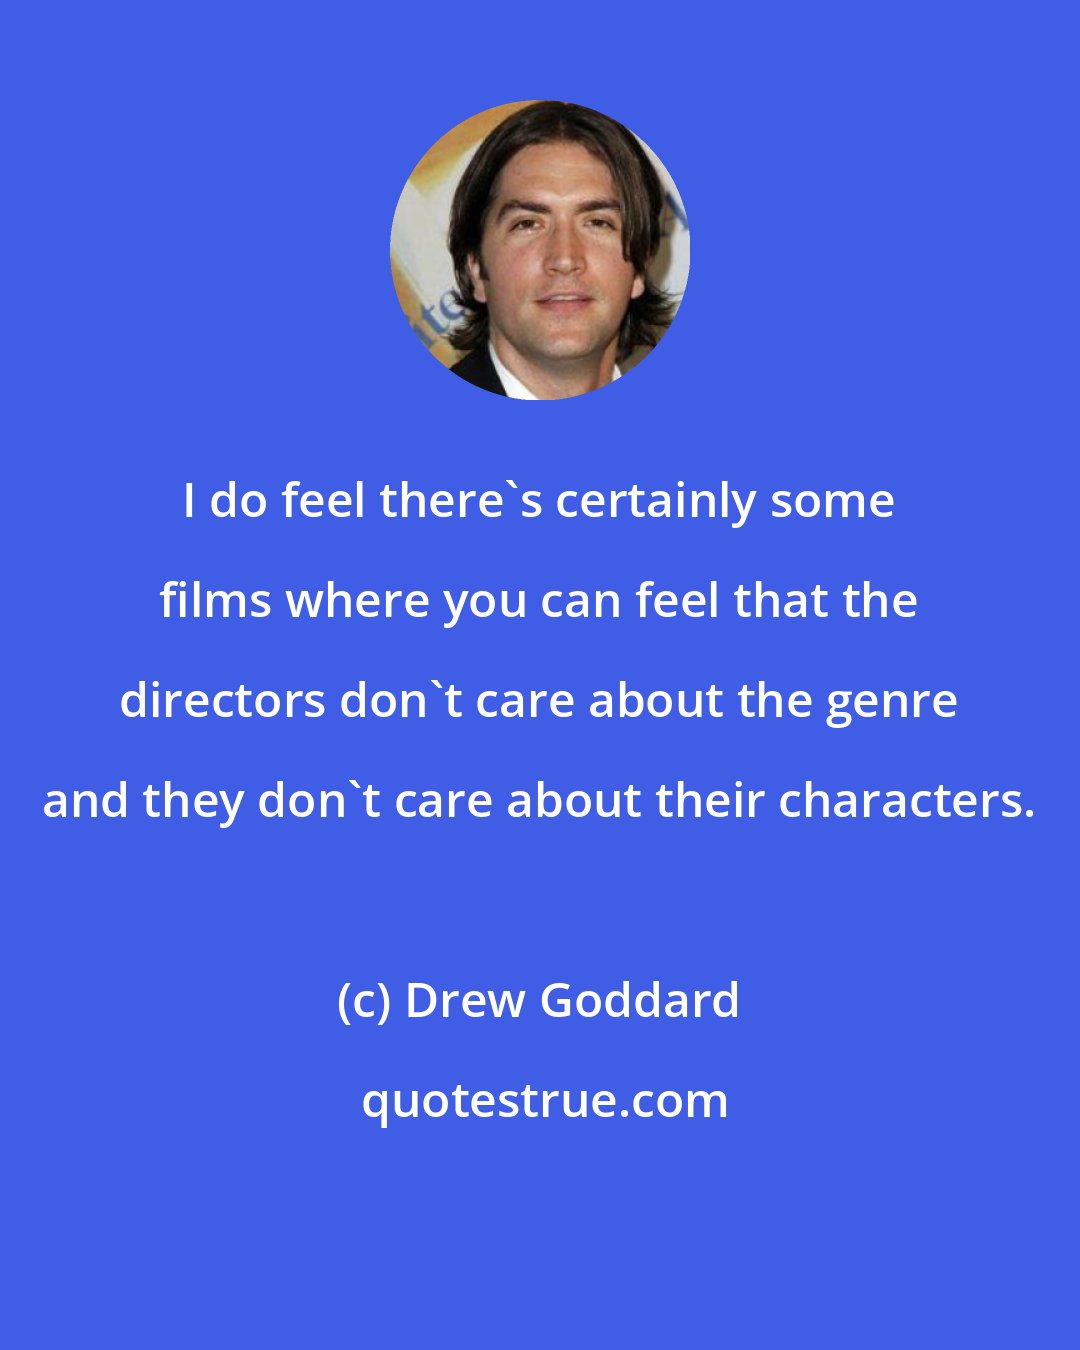 Drew Goddard: I do feel there's certainly some films where you can feel that the directors don't care about the genre and they don't care about their characters.